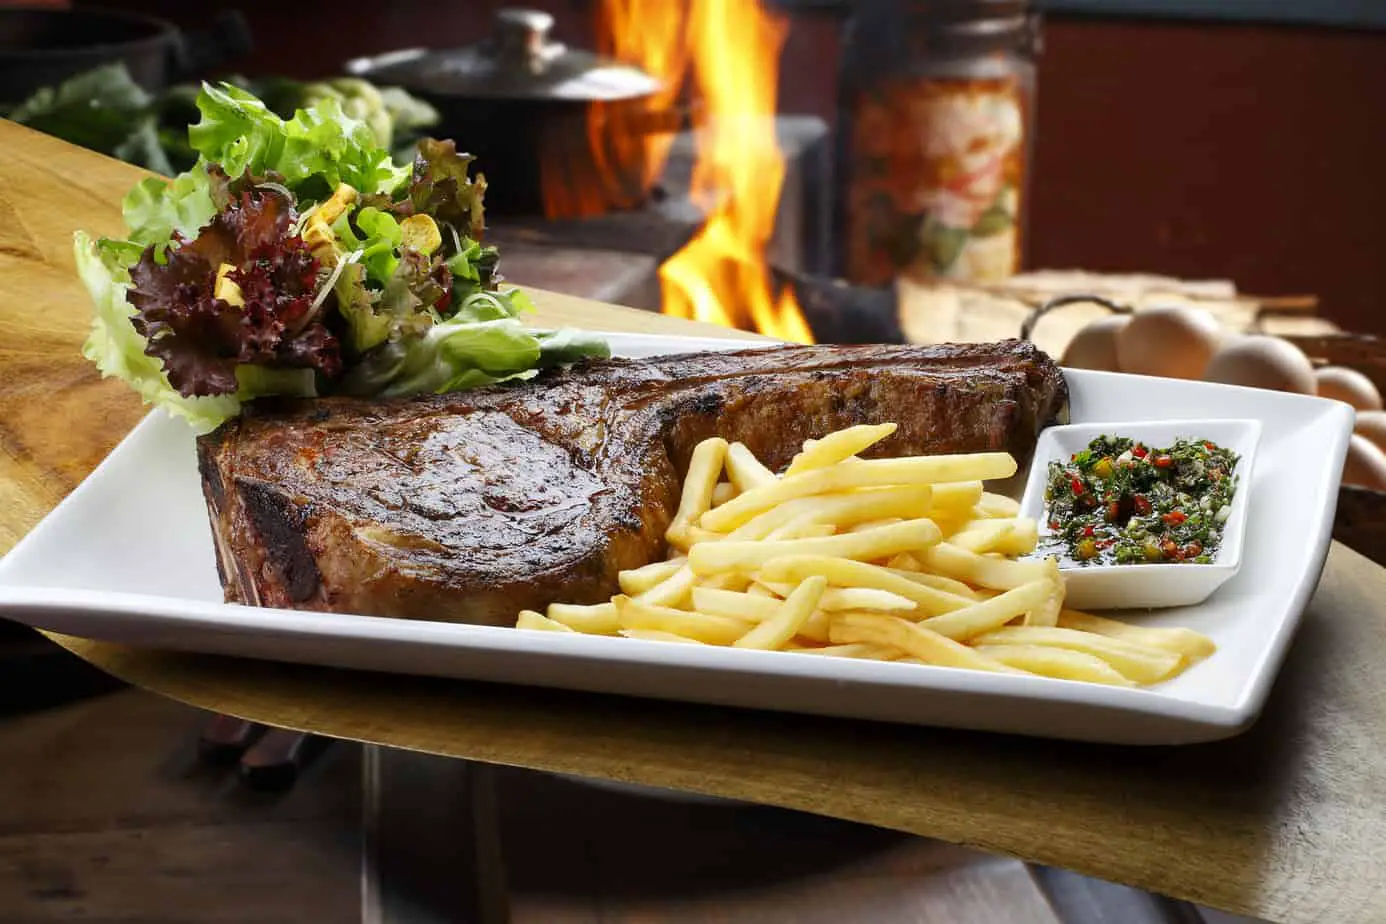 Prime rib with fries and salad